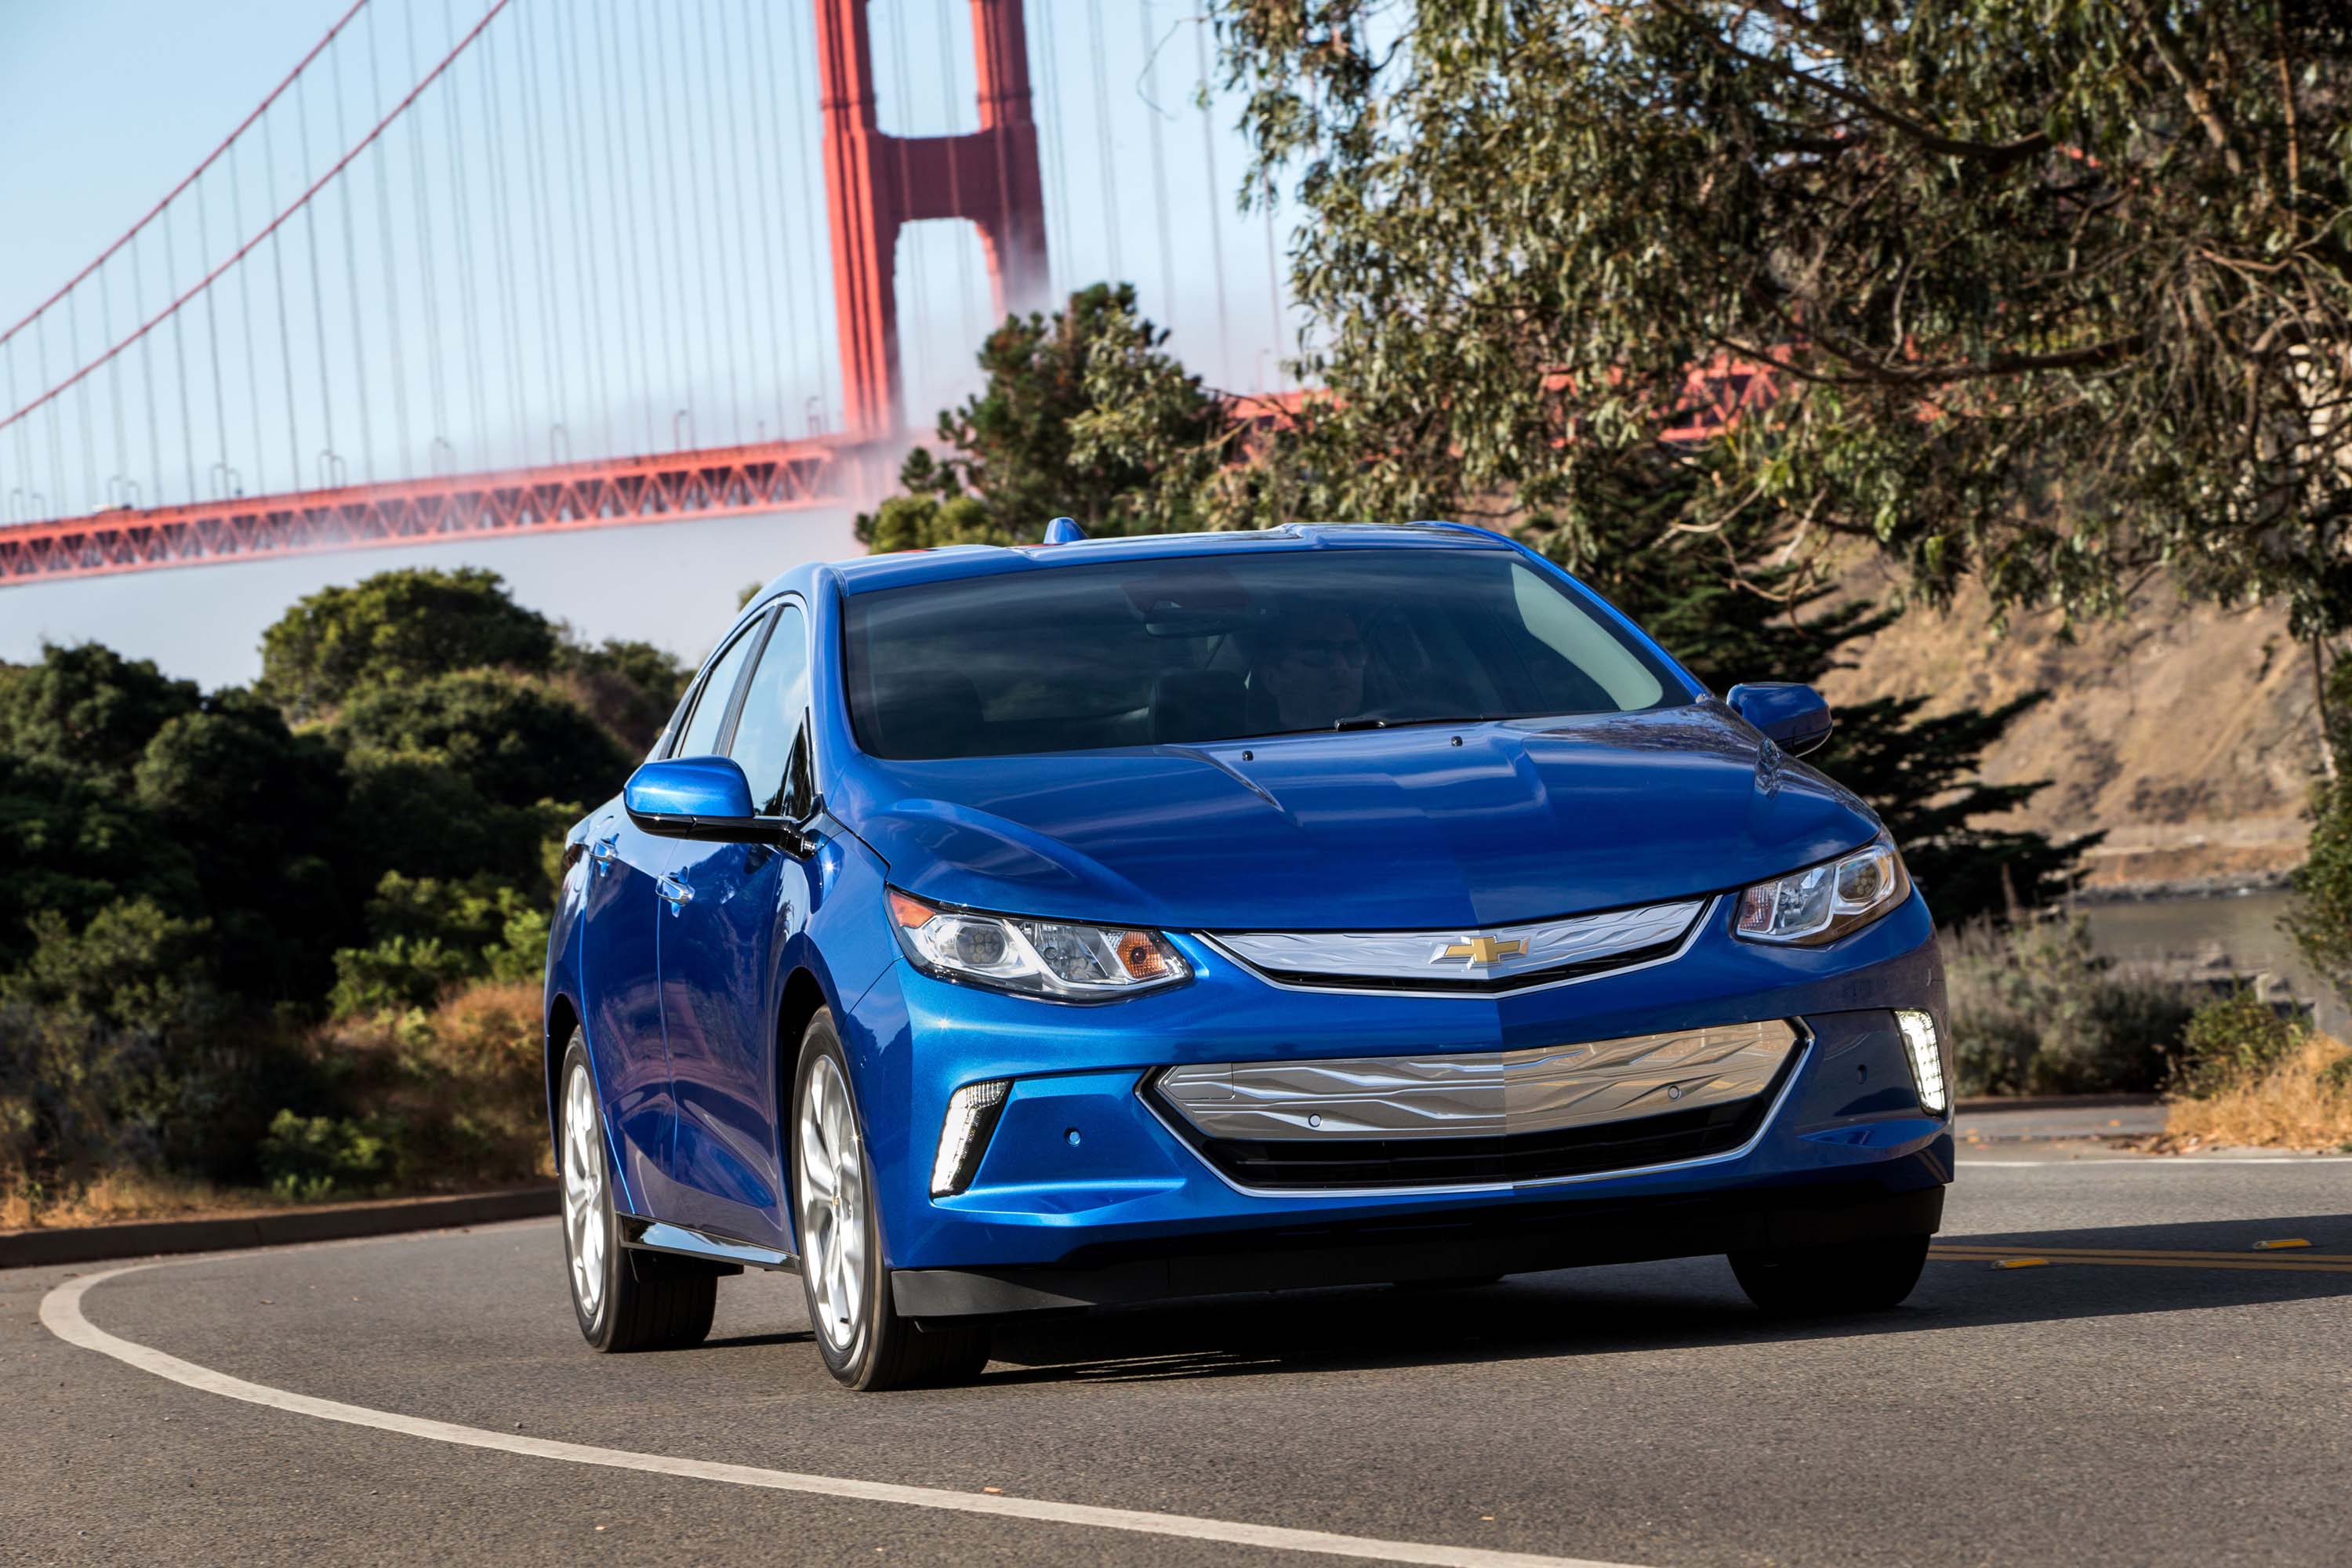 GM plug-in hybrids, Ford Supercharger adapter, Canoo USPS vans: The Week in Reverse